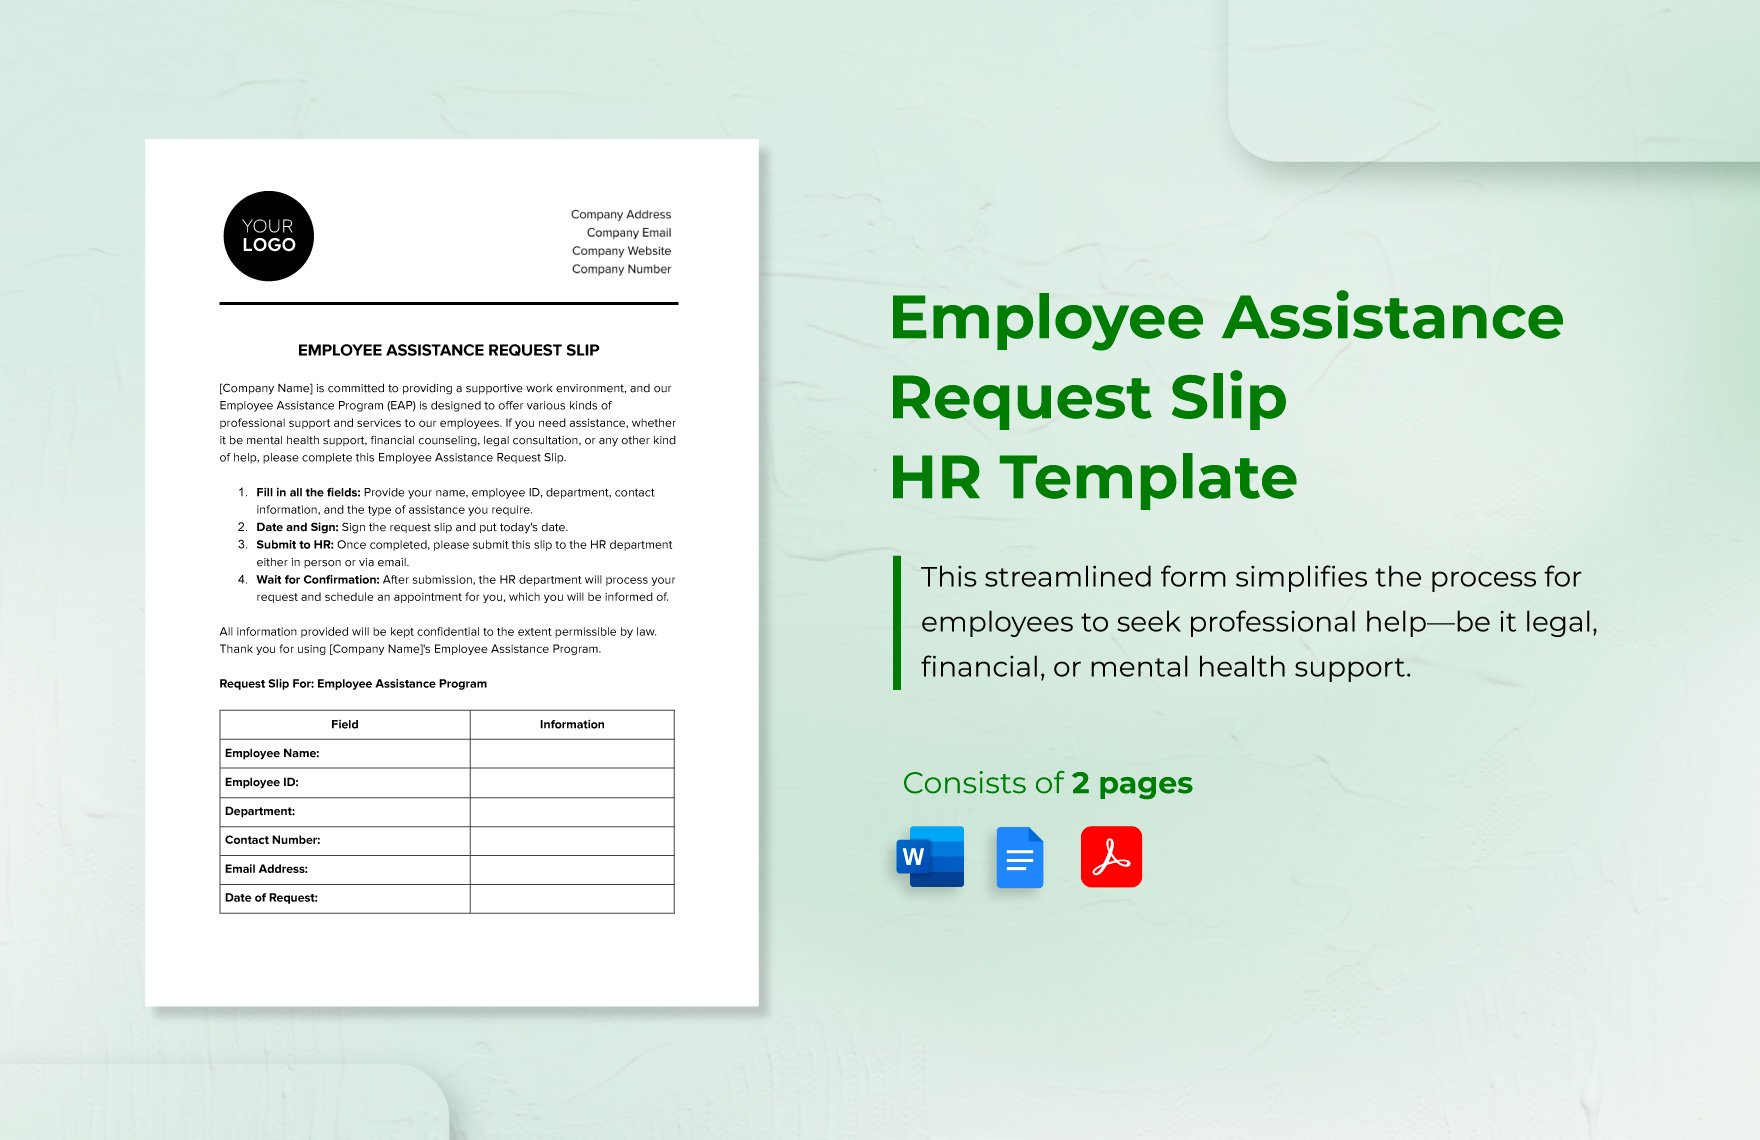 Employee Assistance Request Slip HR Template in Word, Google Docs, PDF